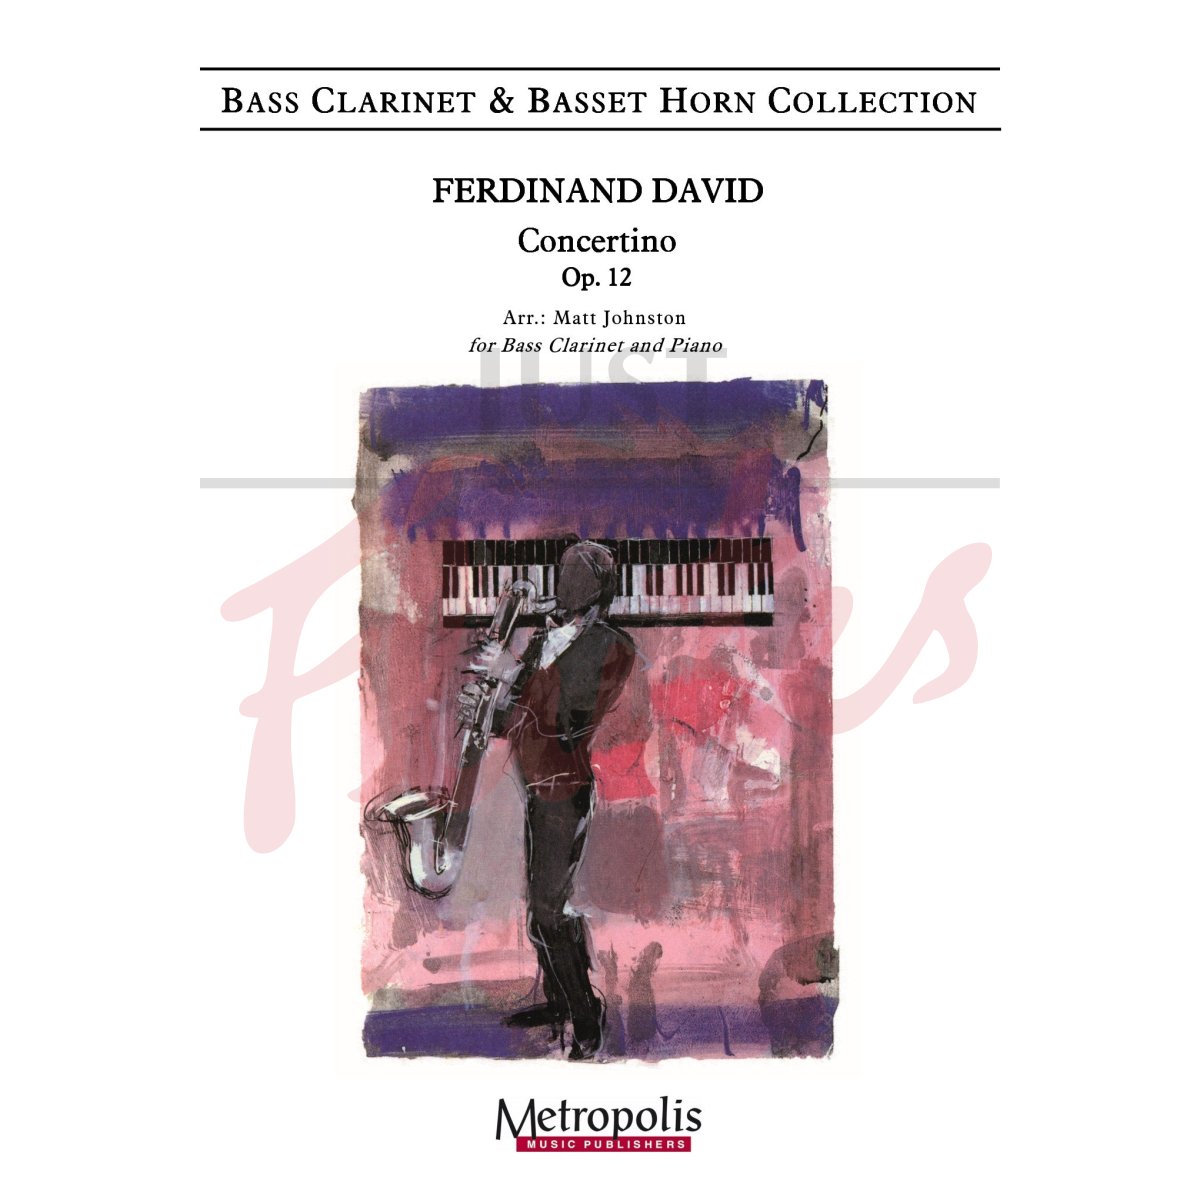 Concertino for Bass Clarinet and Piano